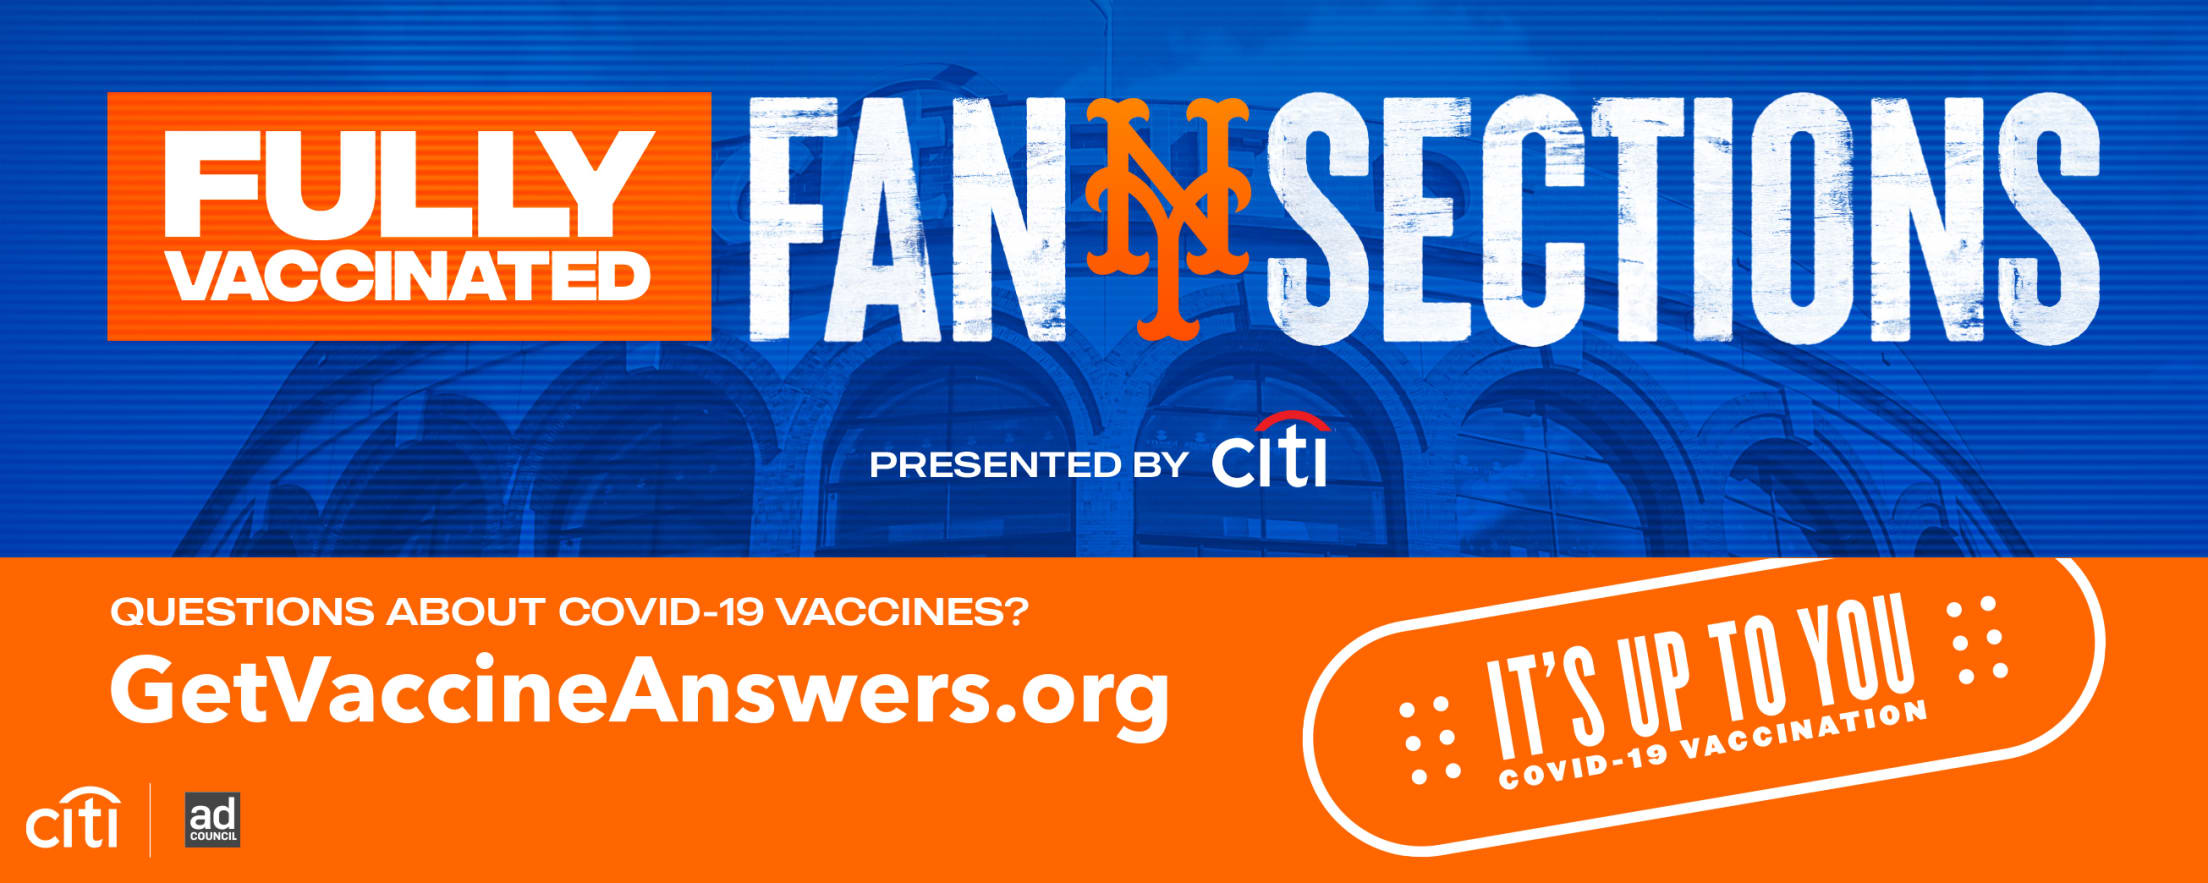 NY lifting COVID occupancy limits for vaccinated Mets, Yankees, Blue Jays  fans